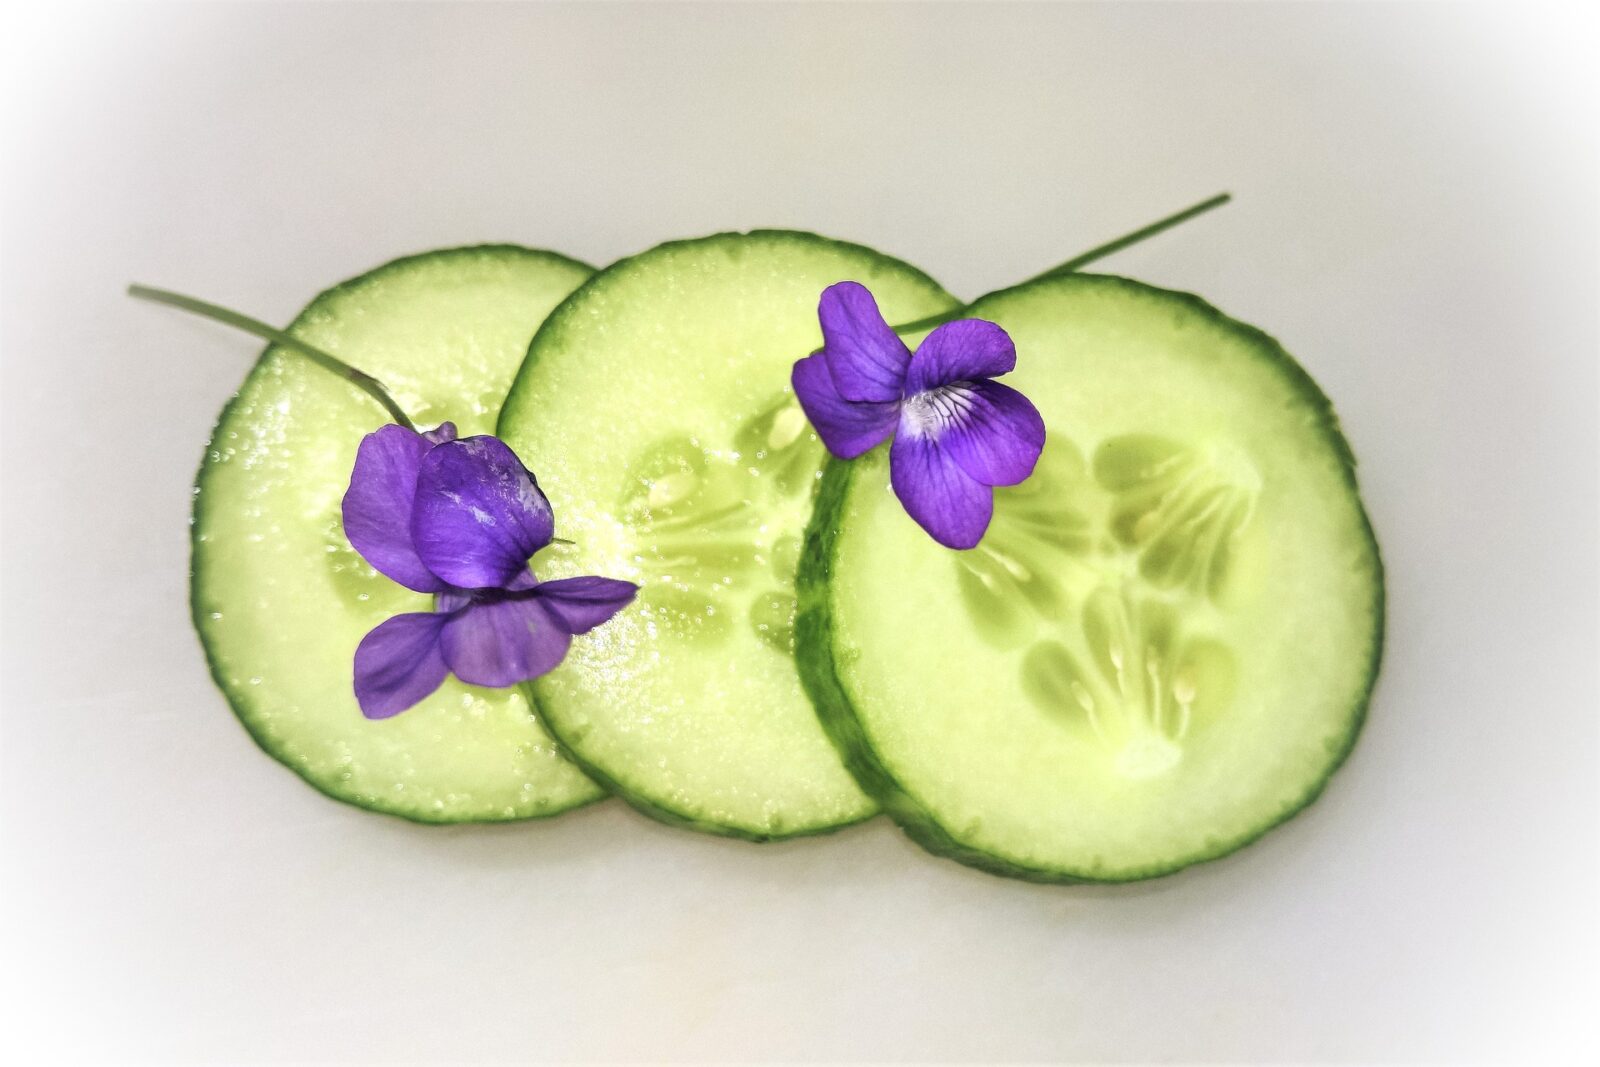 cucumber-placed-beautifully-beauty-tips-online-food-blog